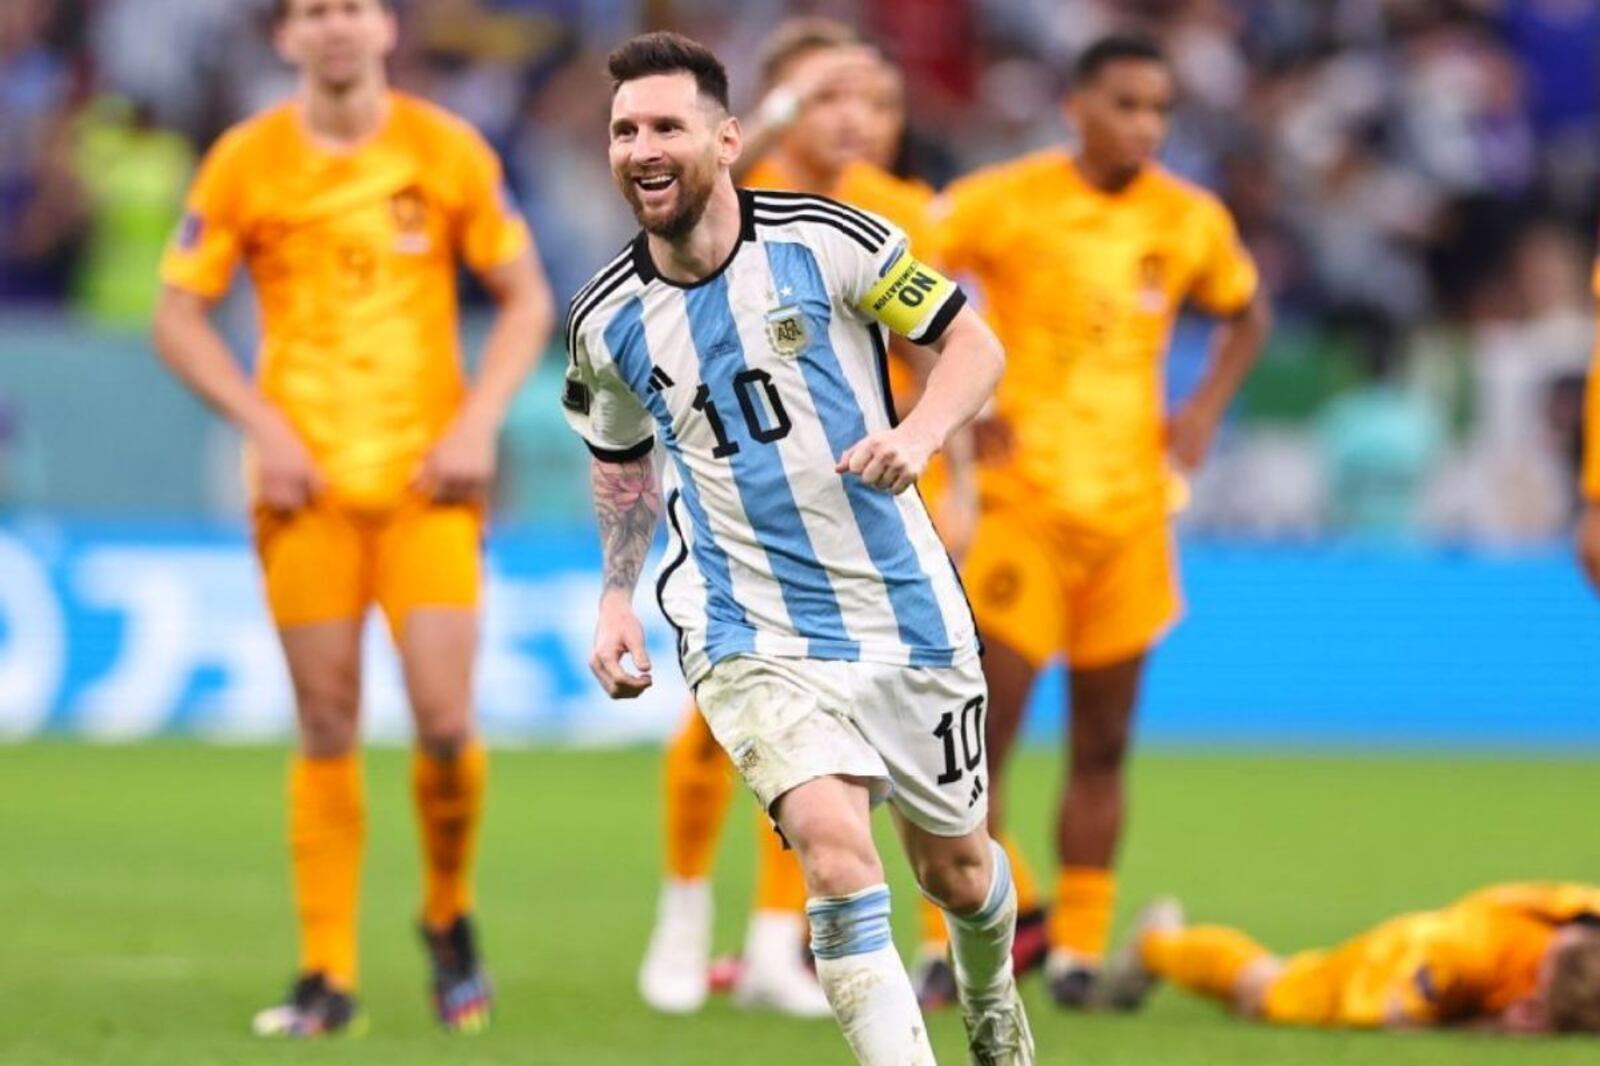 Following Van Gaal's statement about Argentina, the day Messi silenced him on the field